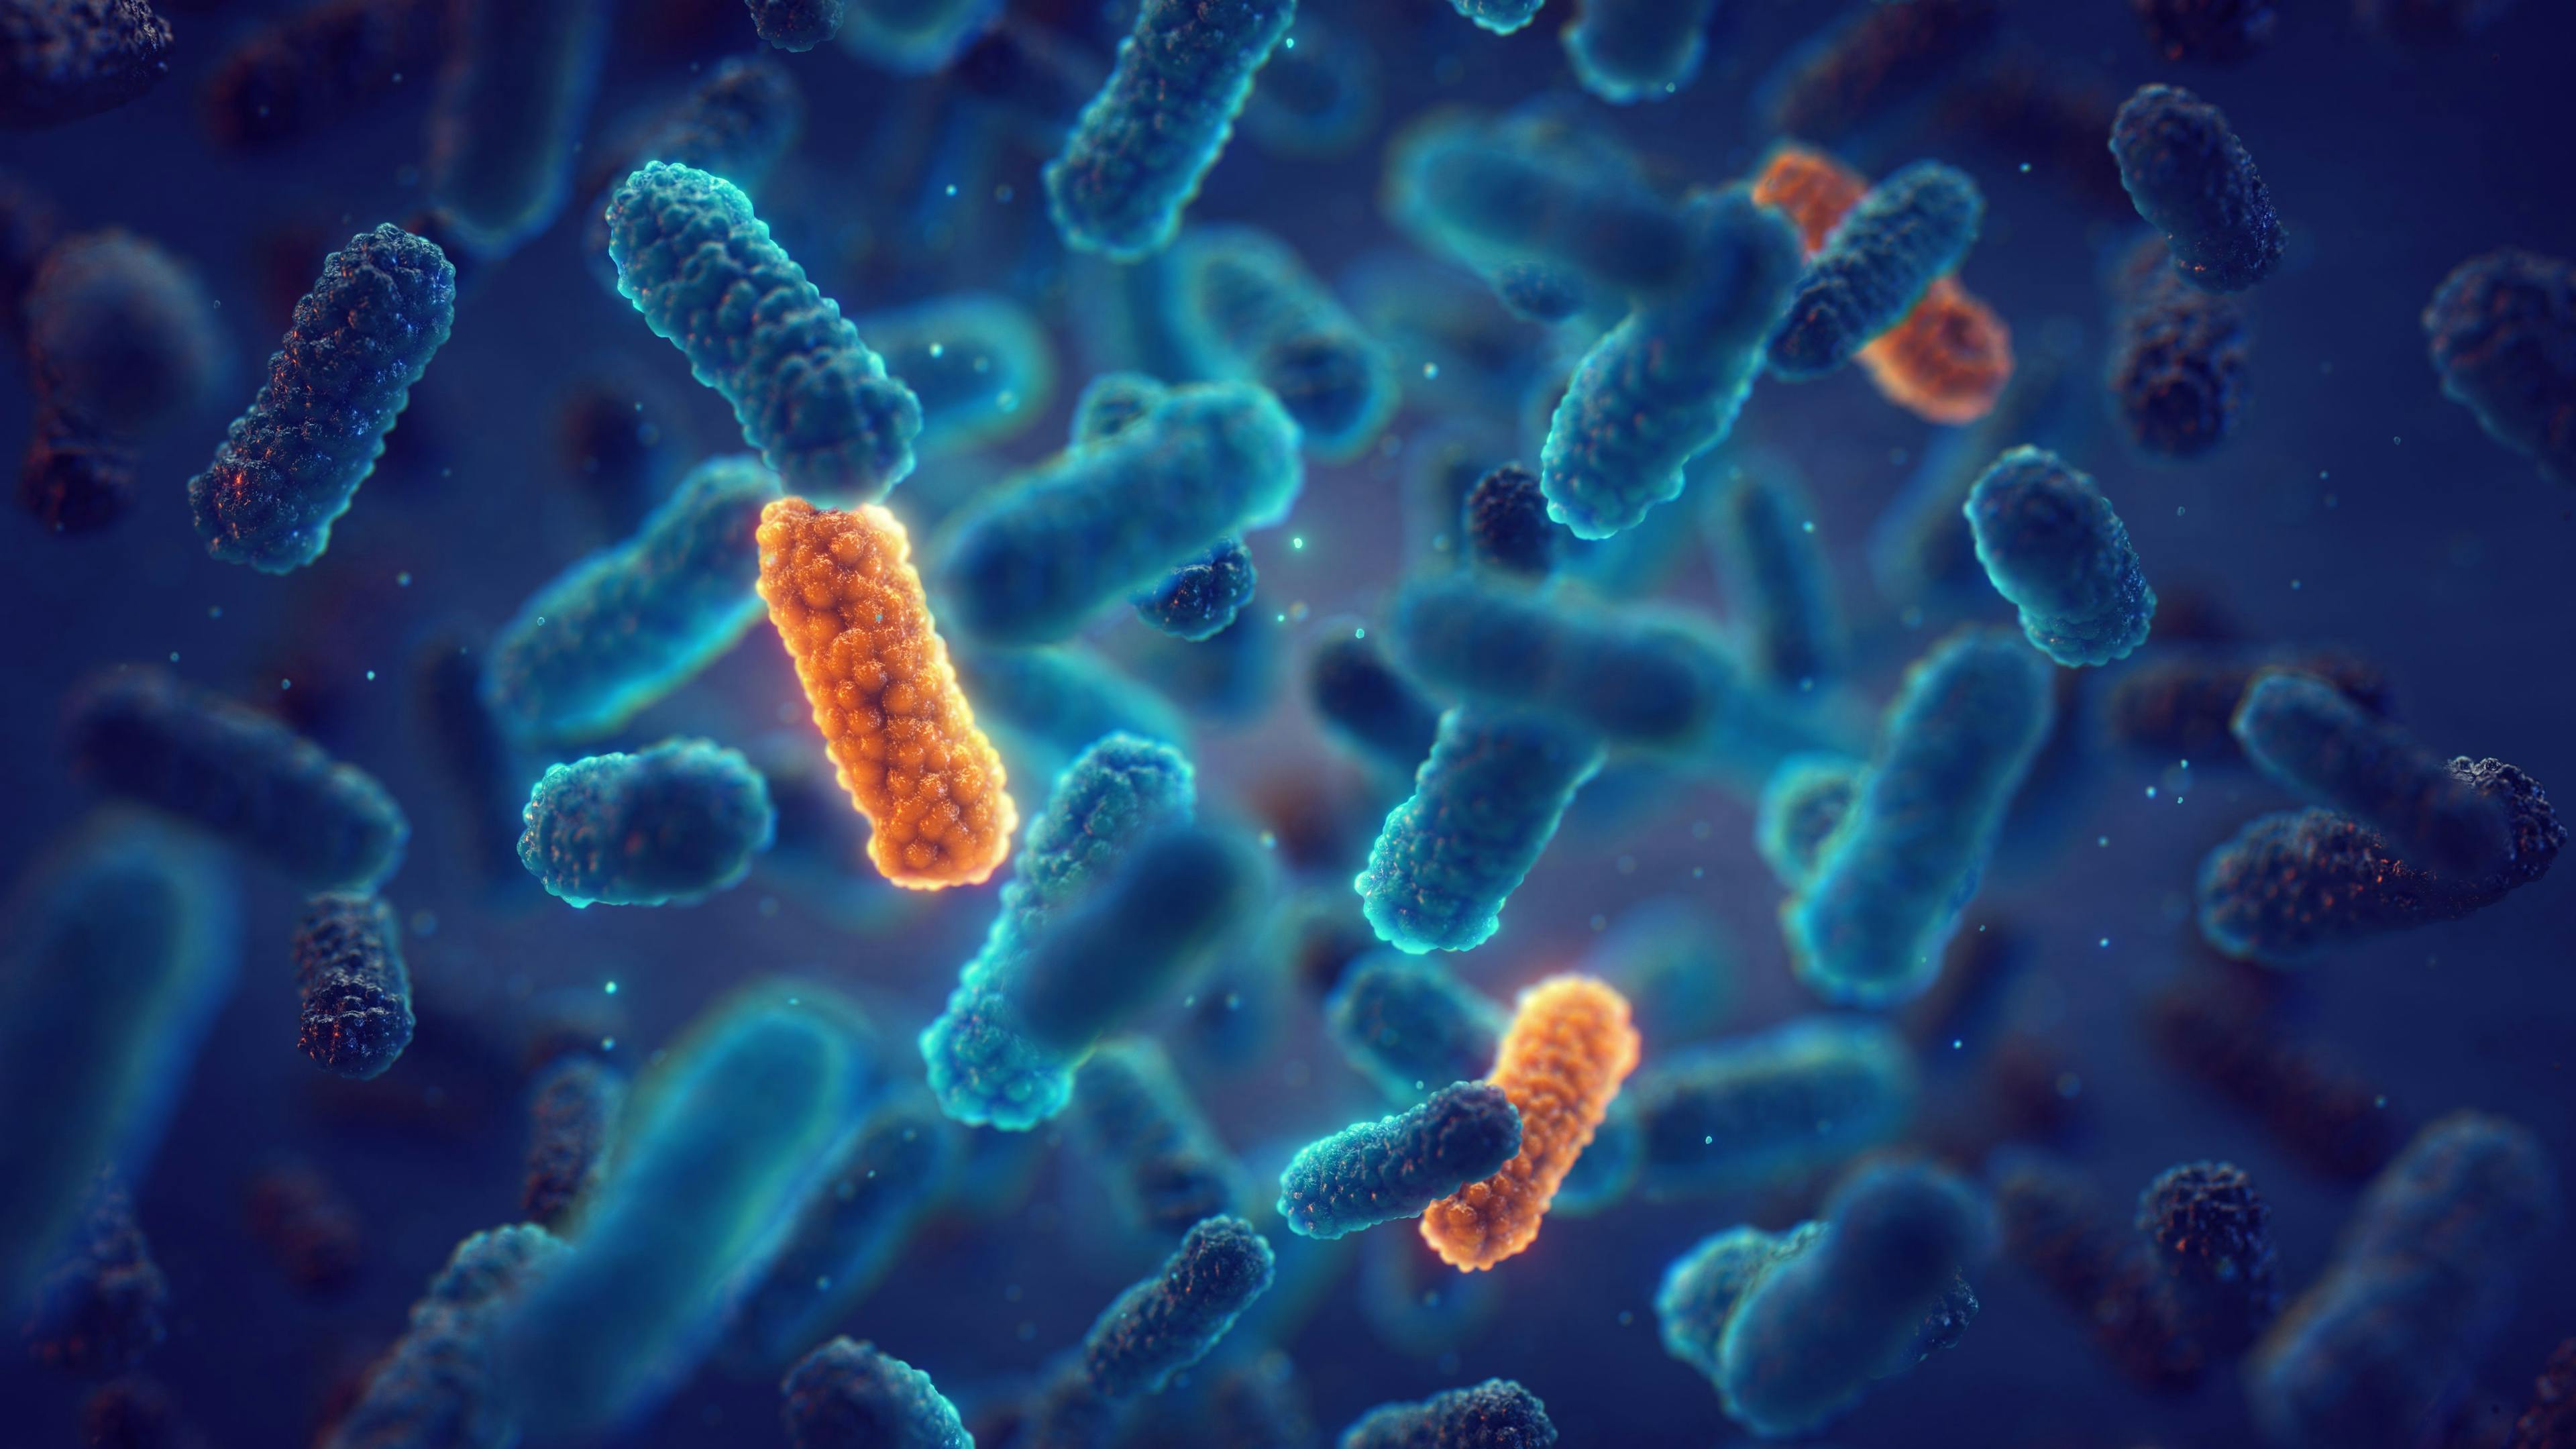 As a result, treatment-resistant infections are linked to more than 5 million deaths globally each year. Image Credit: © nobeastsofierce - stock.adobe.com